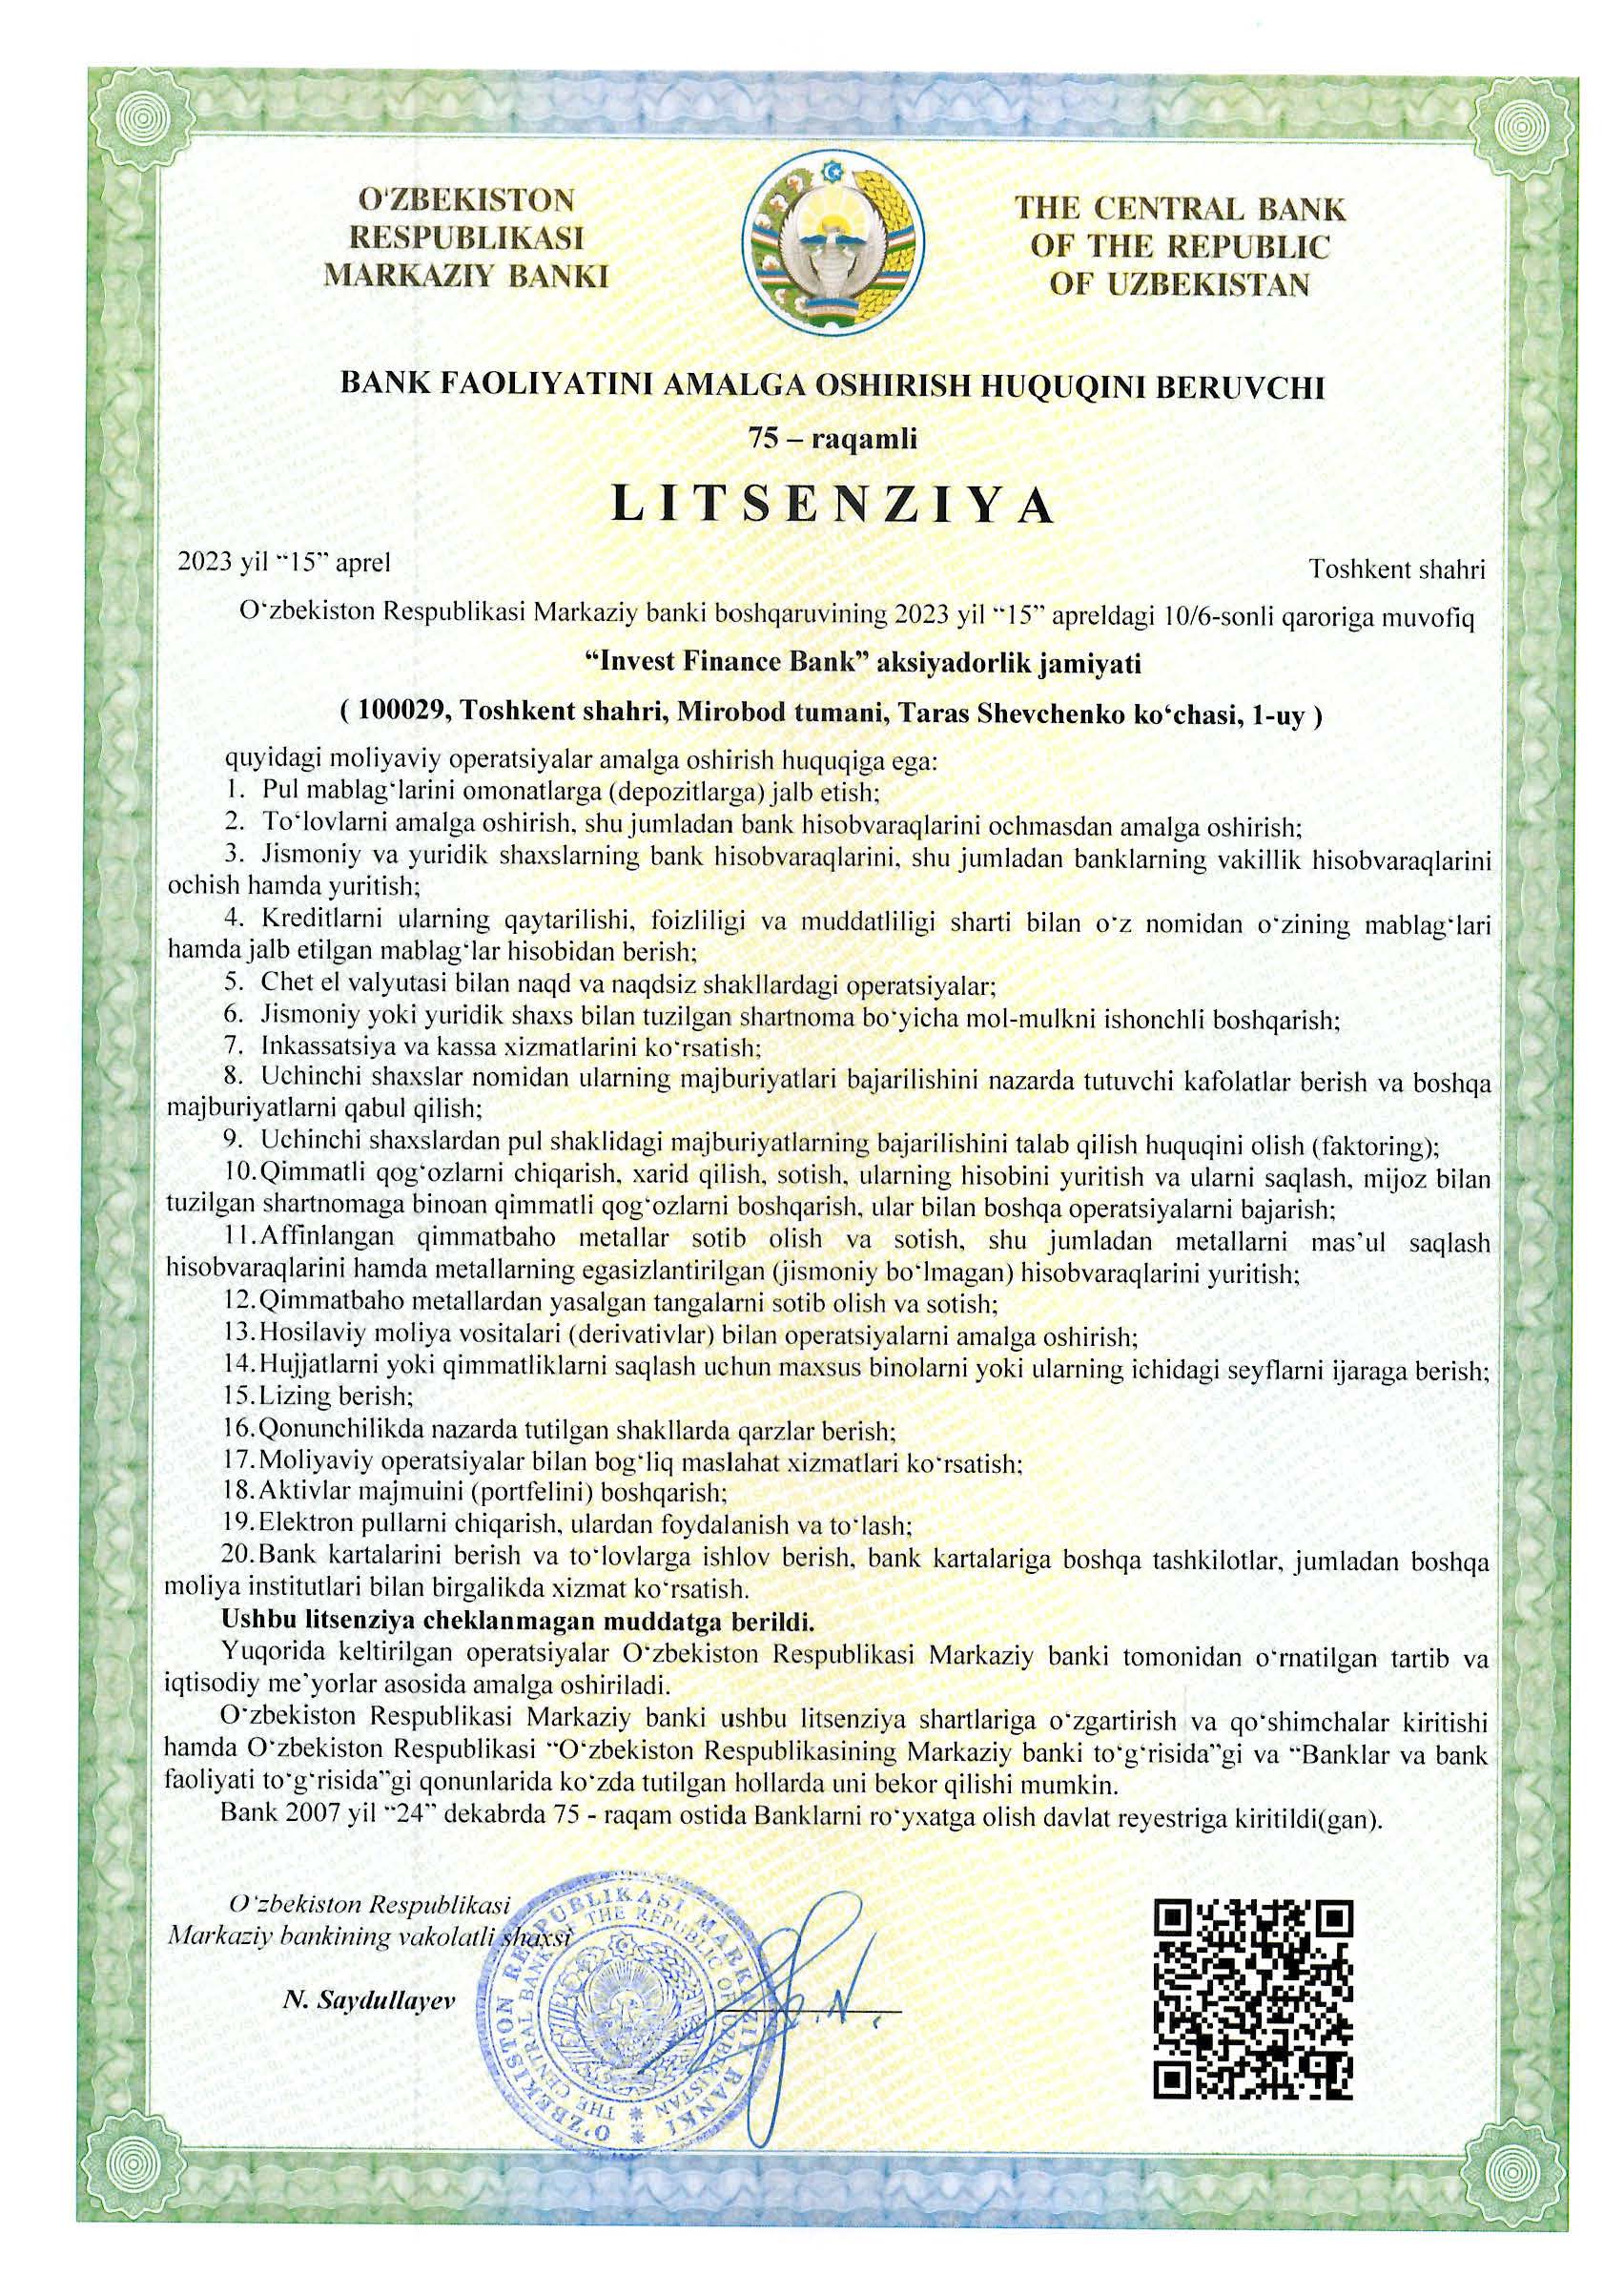 License of the Central Bank